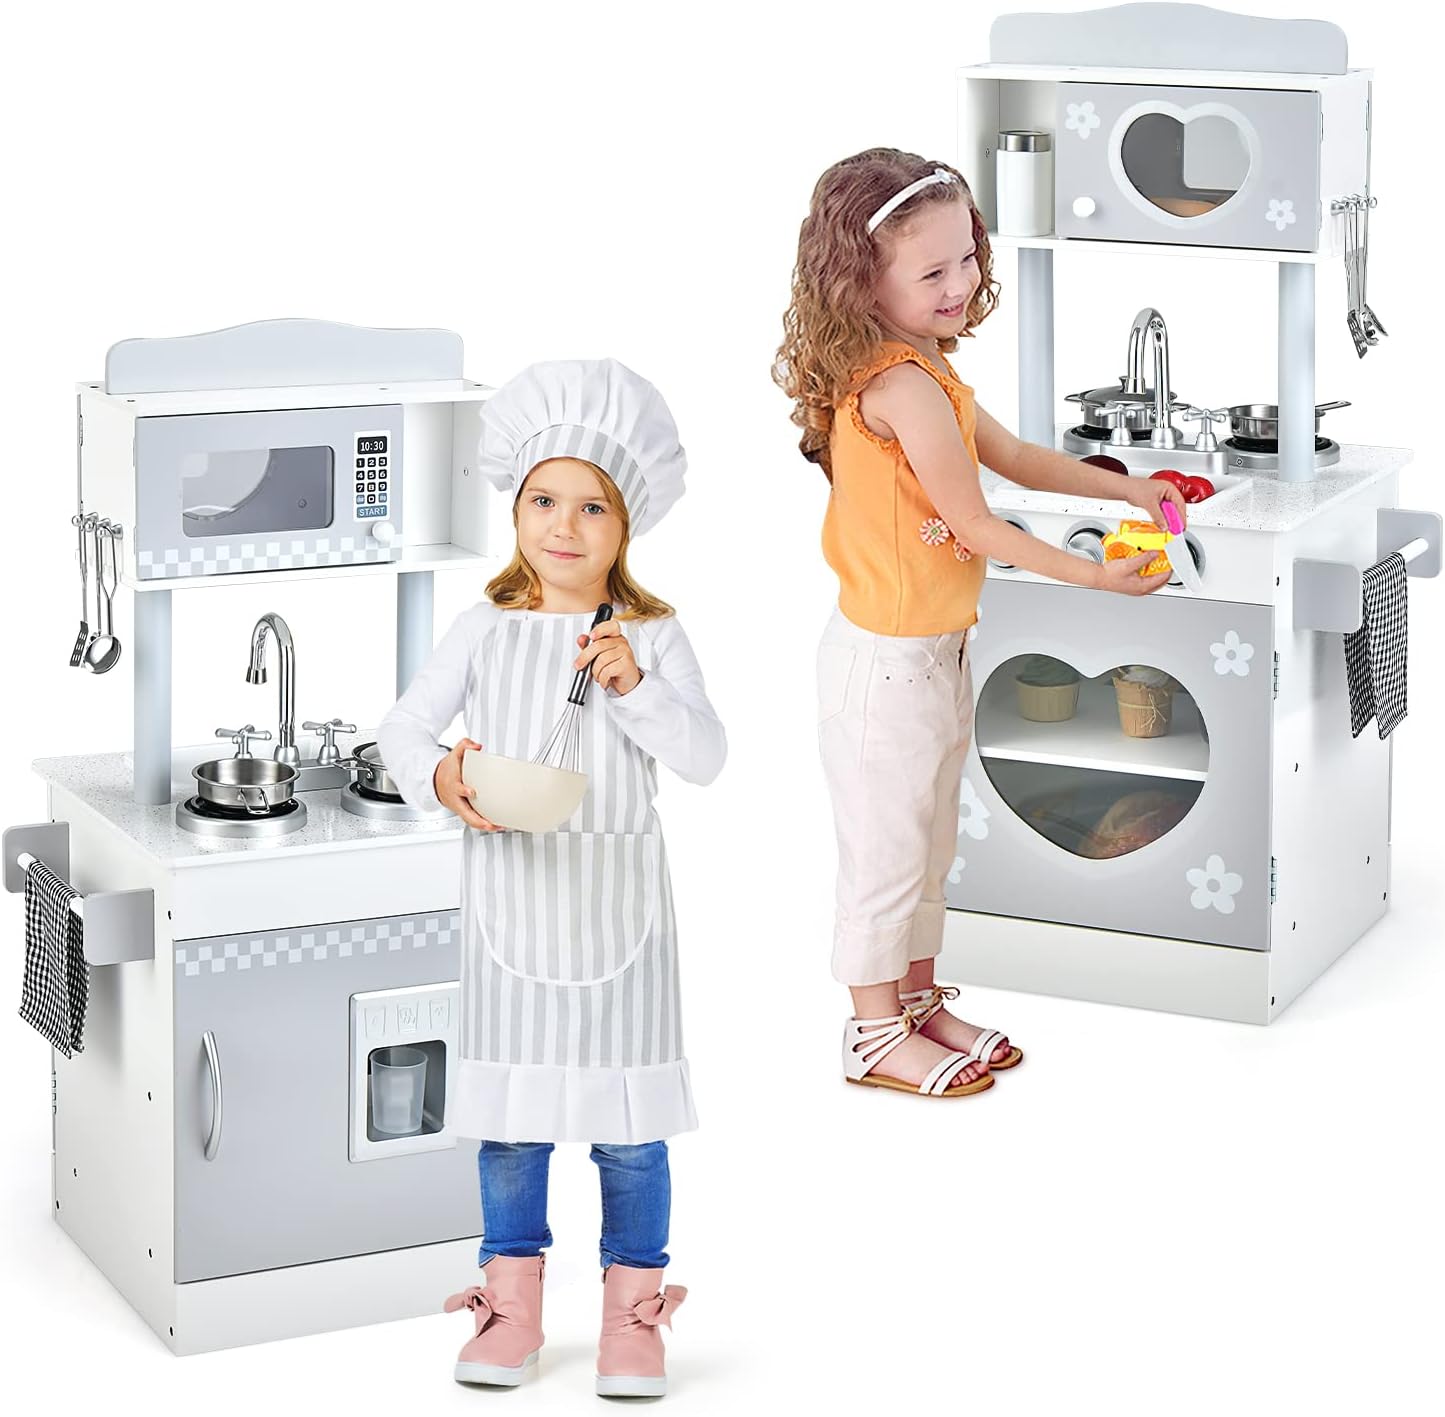 INFANS 2 in 1 Kids Play Kitchen and Restaurant, Double Sided Toddler Wooden Pretend Cooking Set with Stove Sink Microwave Storage Cabinet, Simulation Kitchen Toy Set for Boys Girls (Classic)